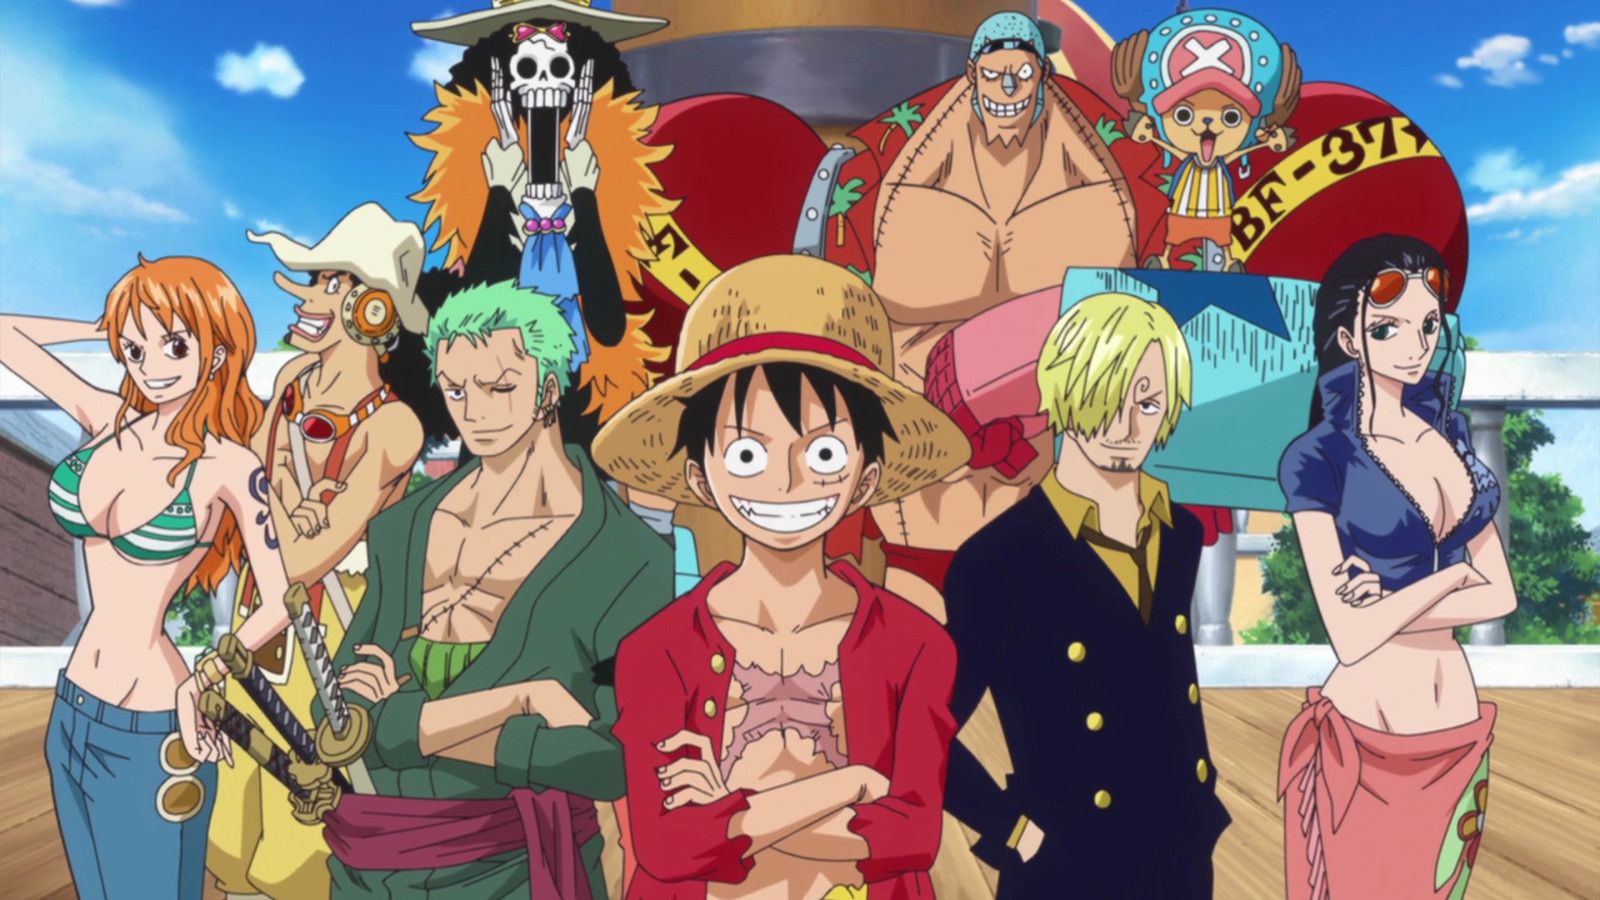 PS4 One Piece Anime Wallpapers - Wallpaper Cave